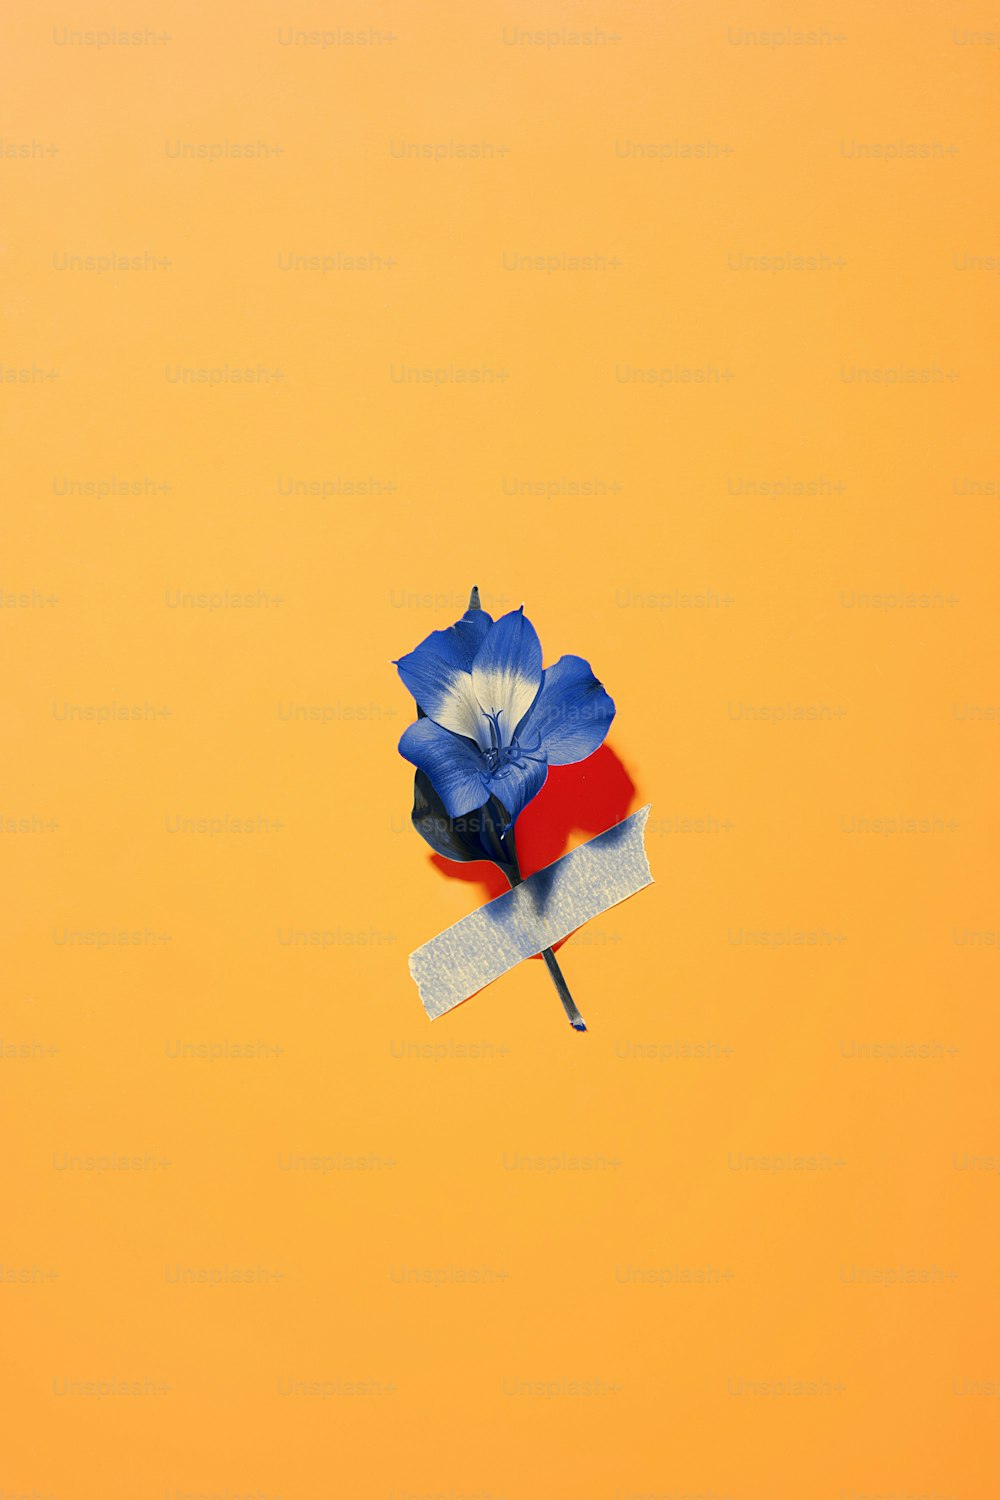 a blue flower with a red center on a yellow background